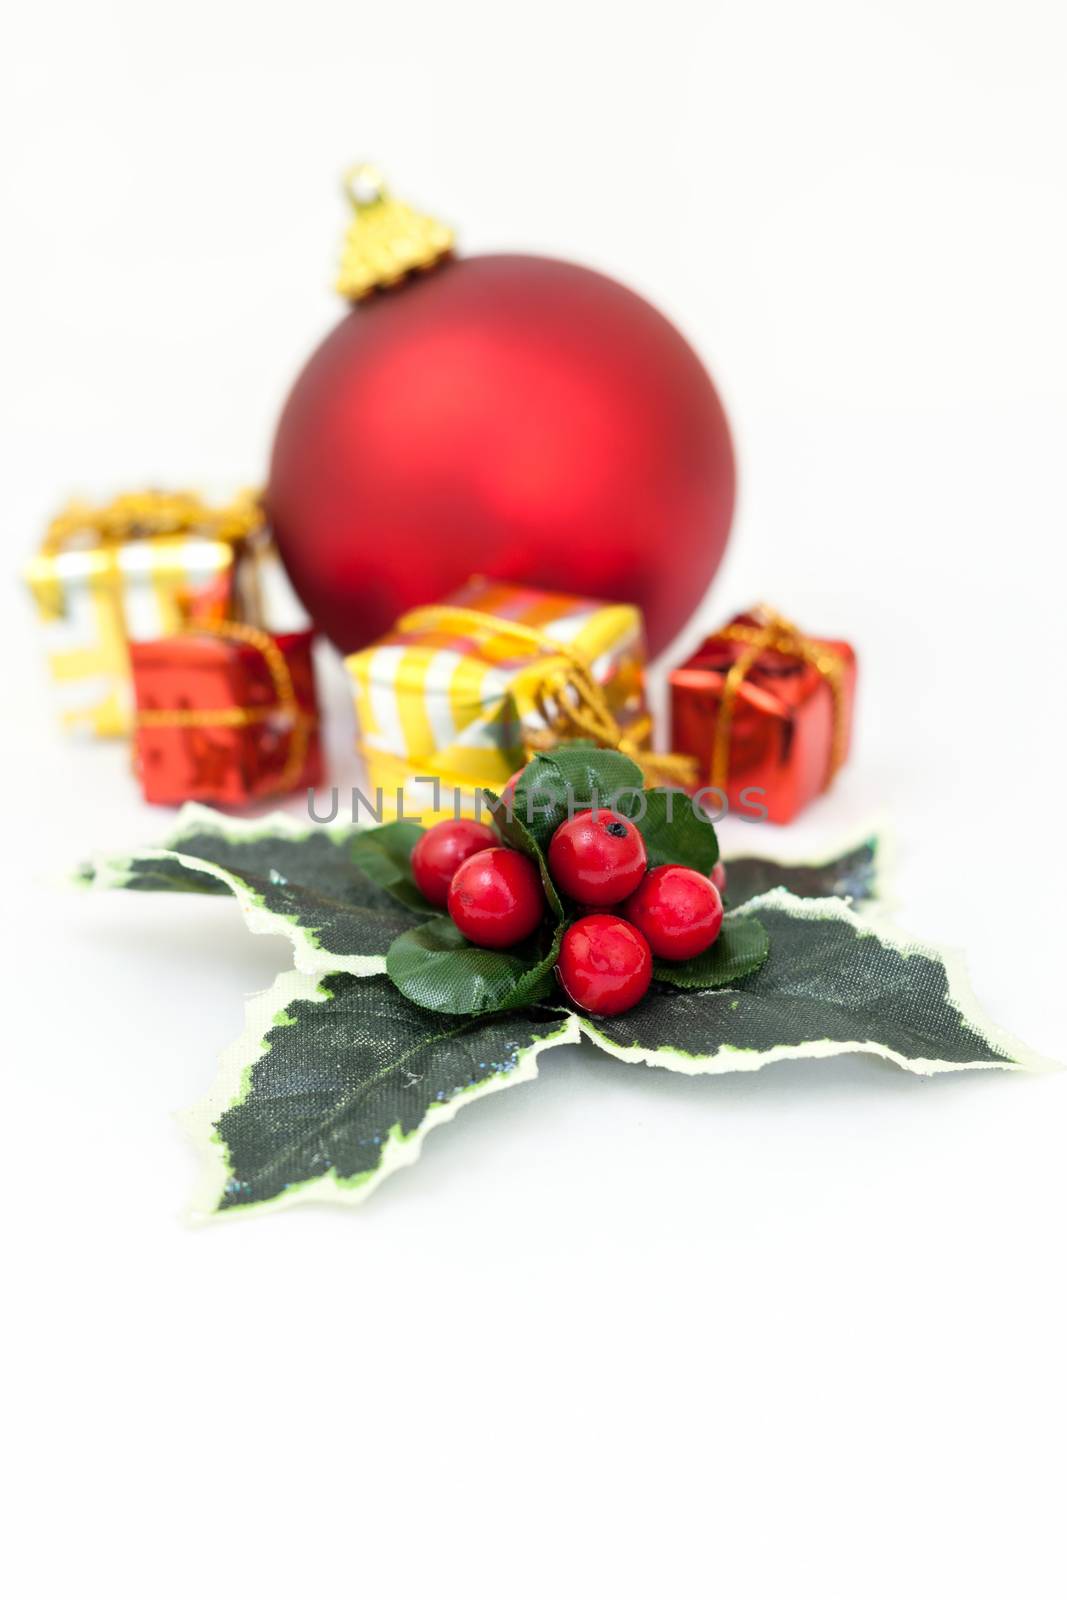 Isolated beautiful Christmas ornaments  by Digoarpi